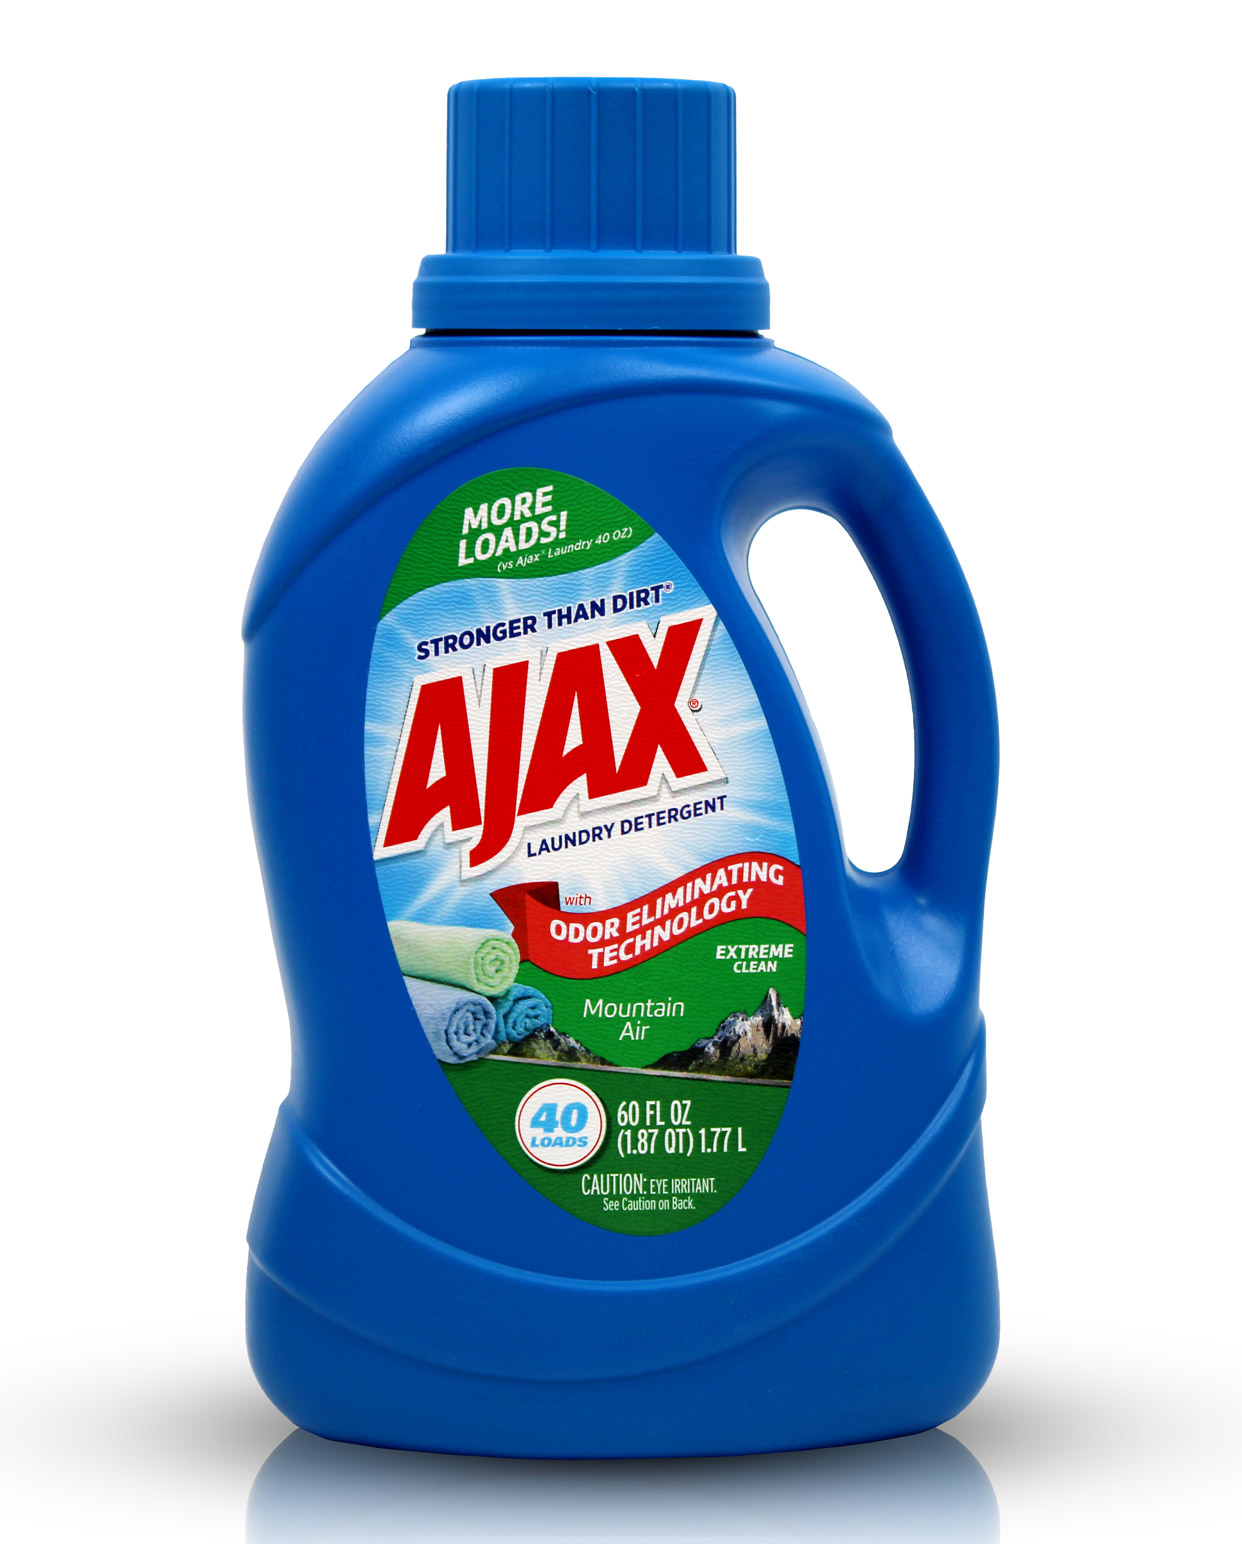 60oz bottle of AJAX Laundry Detergent Extreme Clean with a clear label.